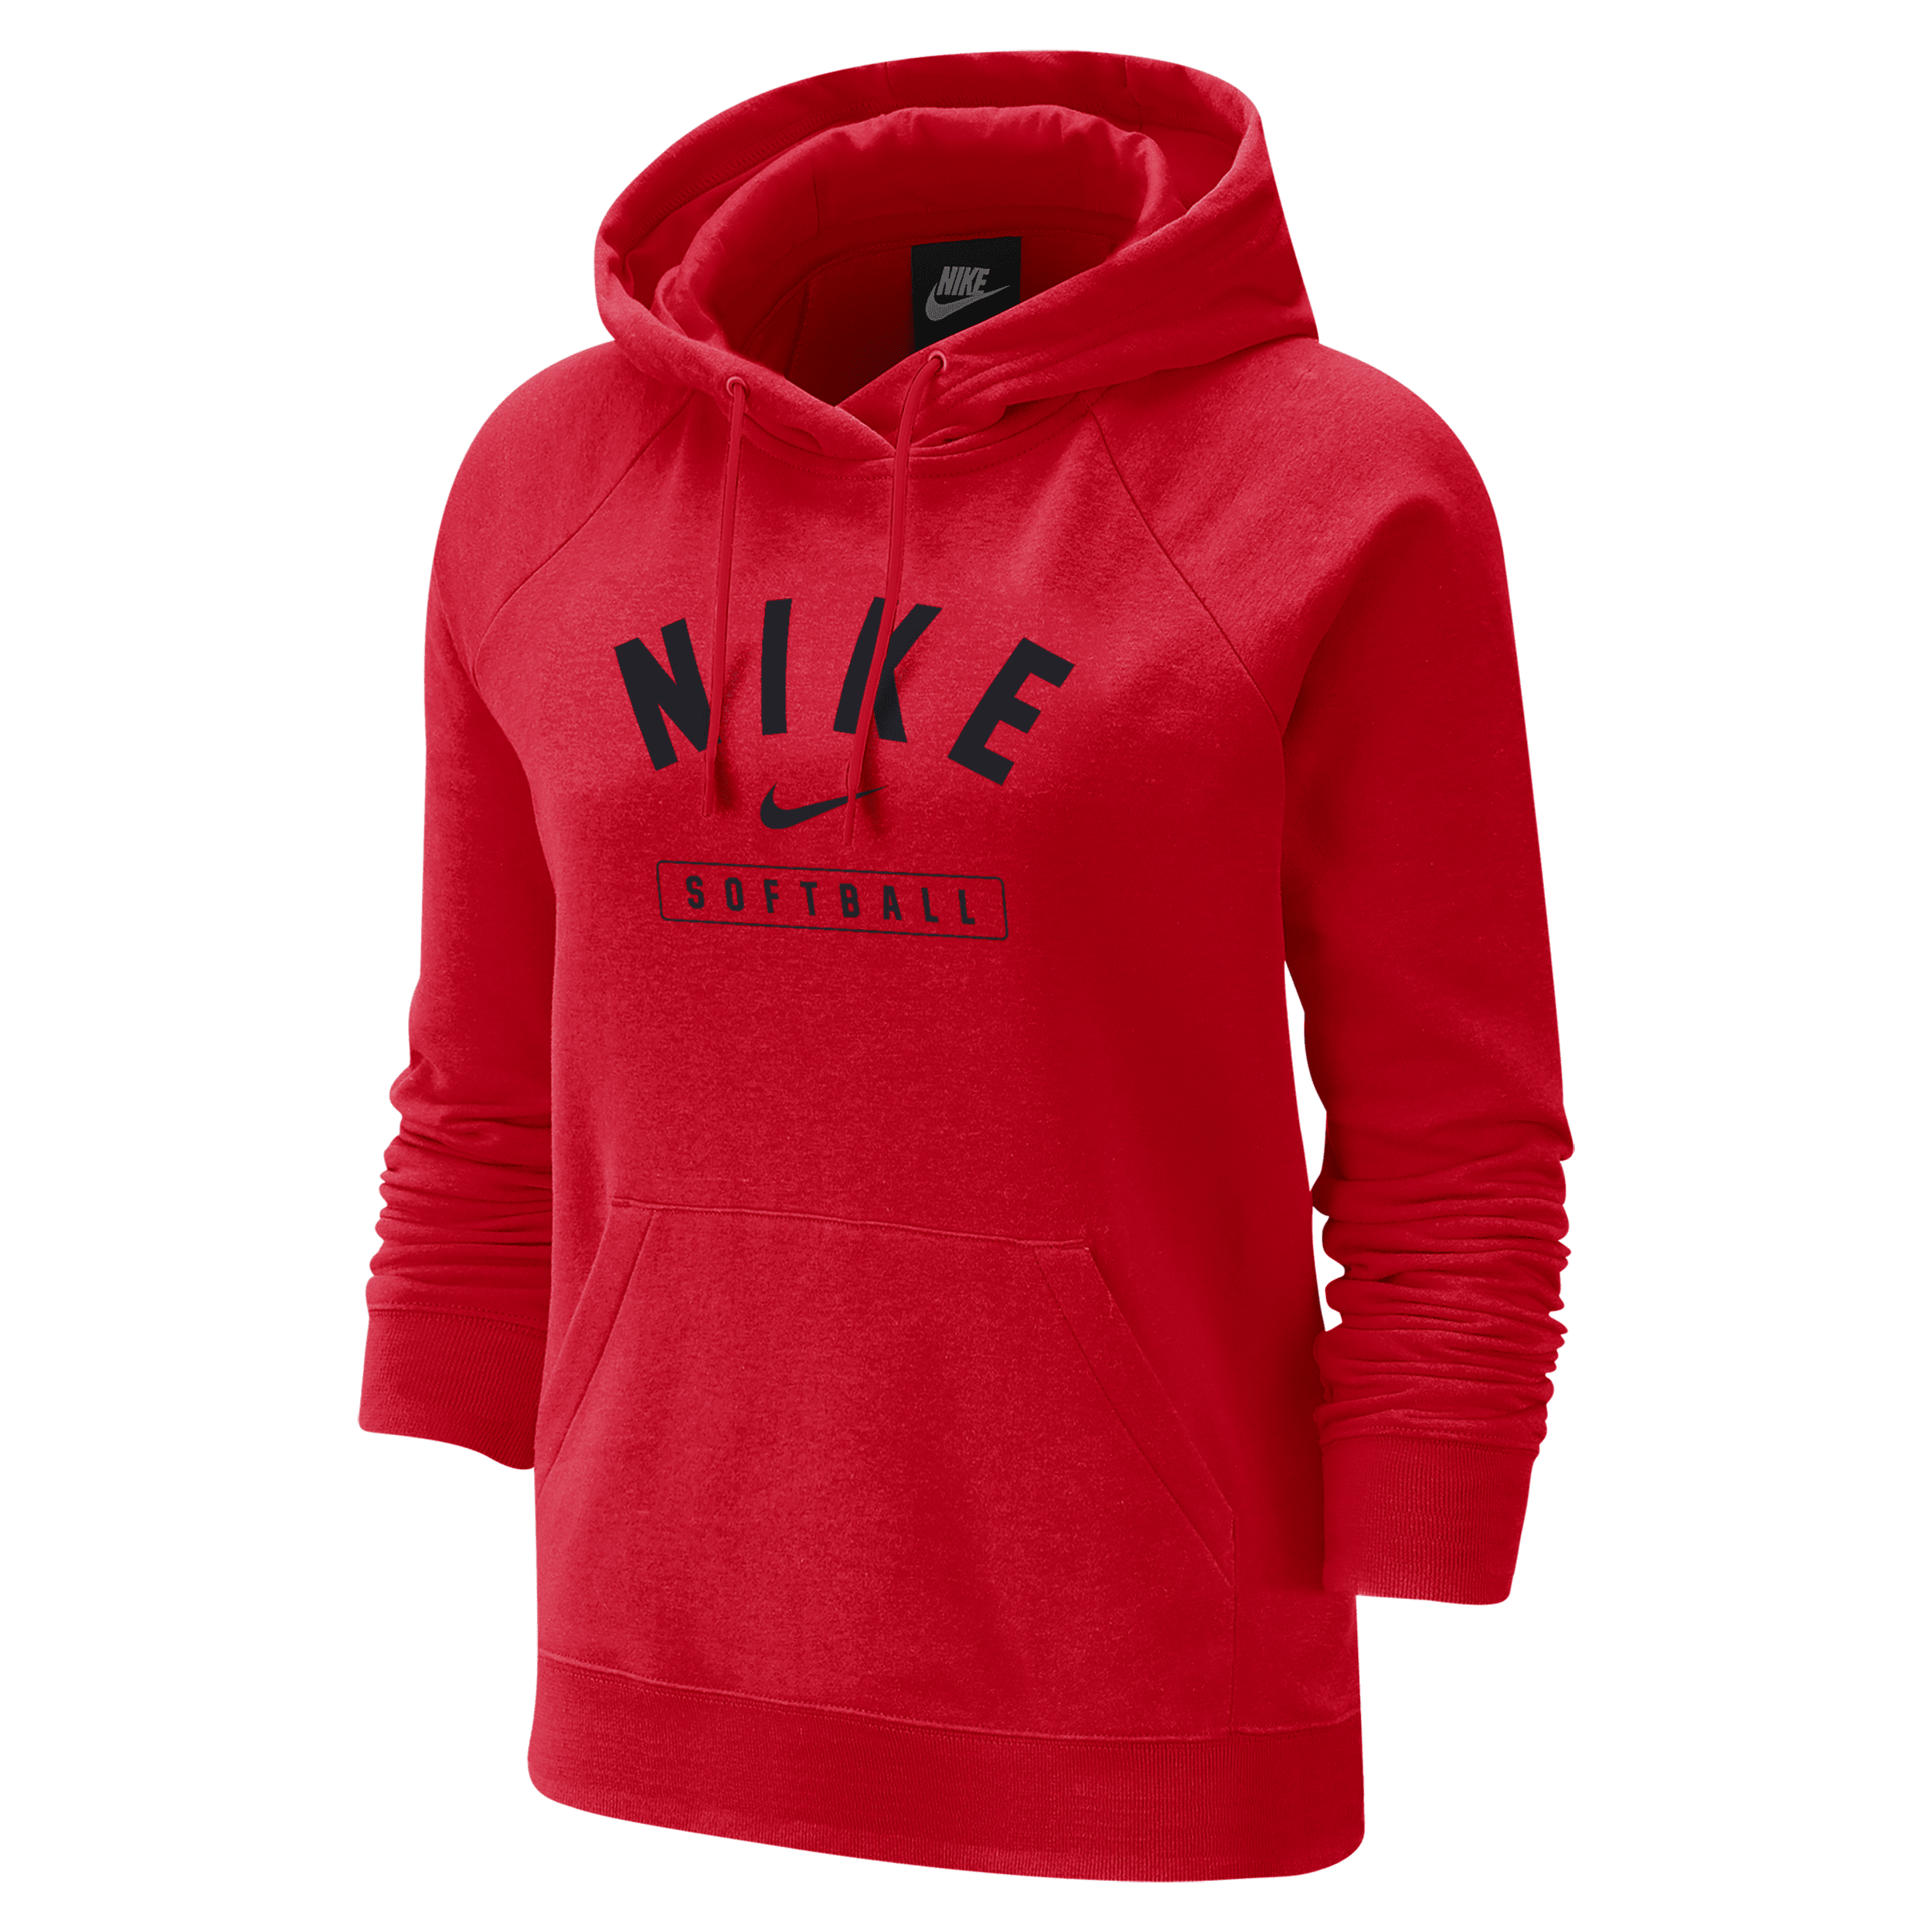 Nike Women's Softball Pullover Hoodie In Red